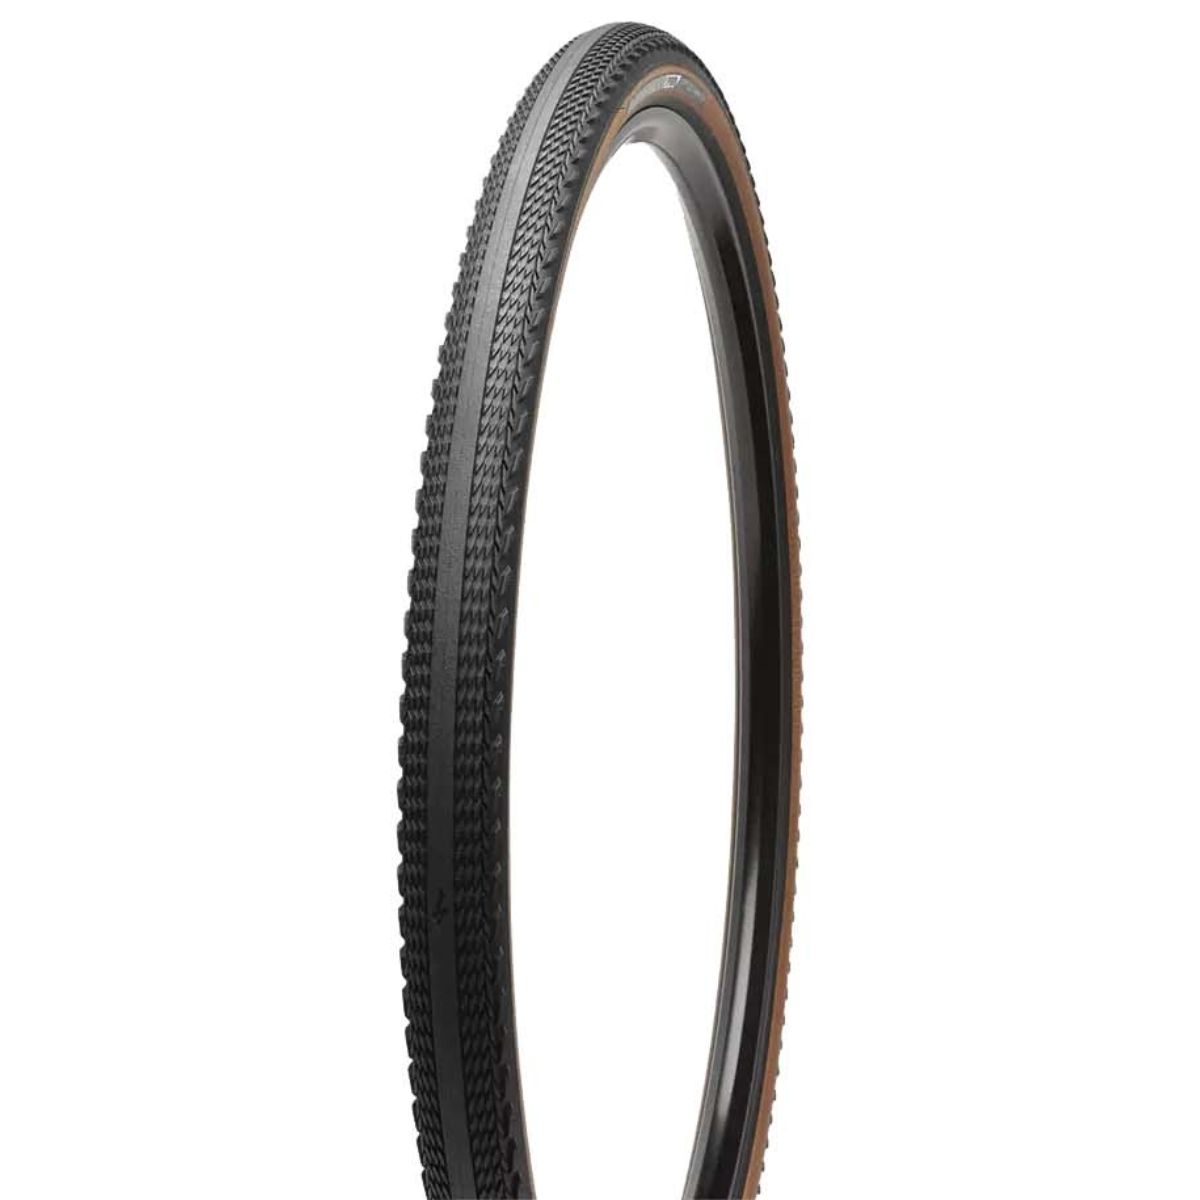 Specialized Pathfinder Pro 2Bliss Ready Tire Natural 700c x 38mm